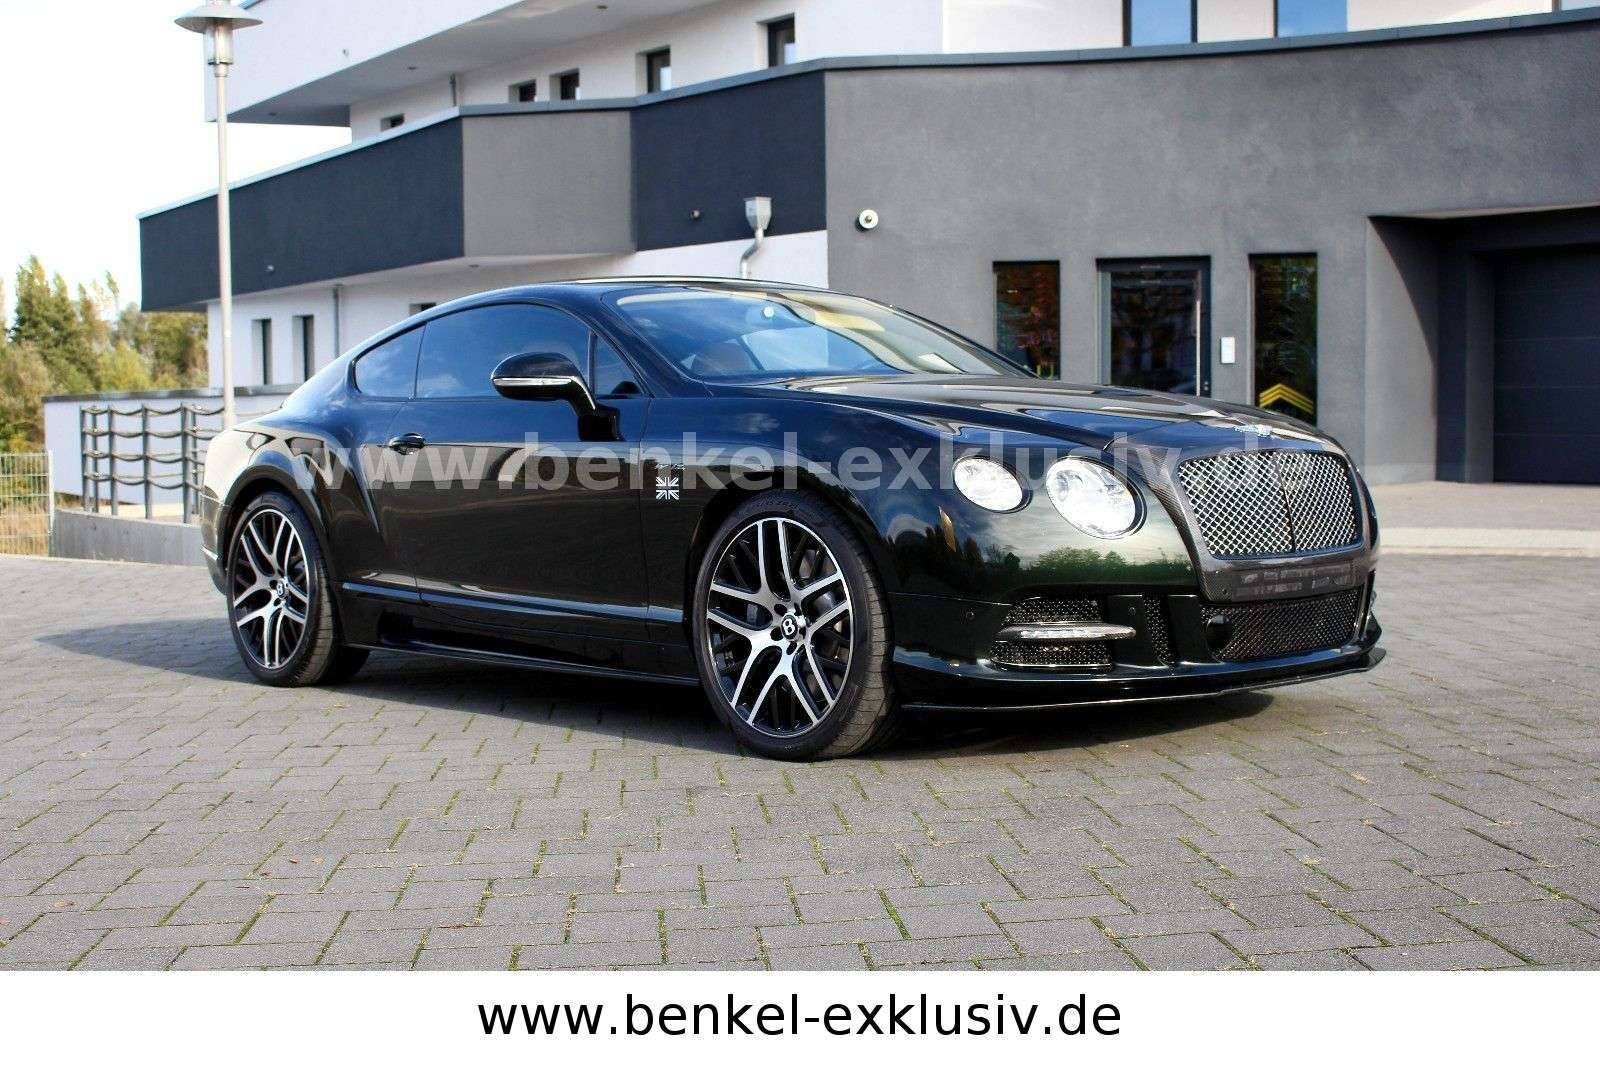 2012 BENTLEY CONTINENTAL GT W12 for sale by auction in Stockholm